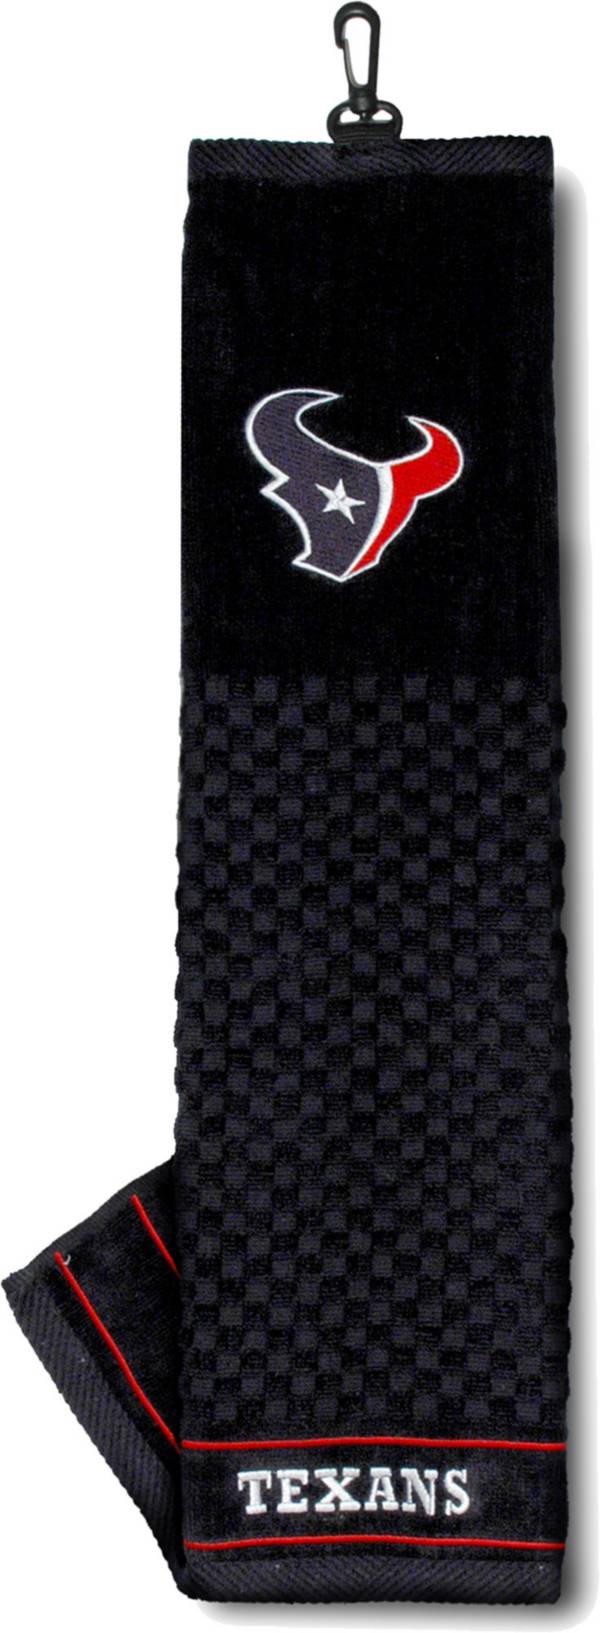 Team Golf Houston Texans Embroidered Golf Towel product image